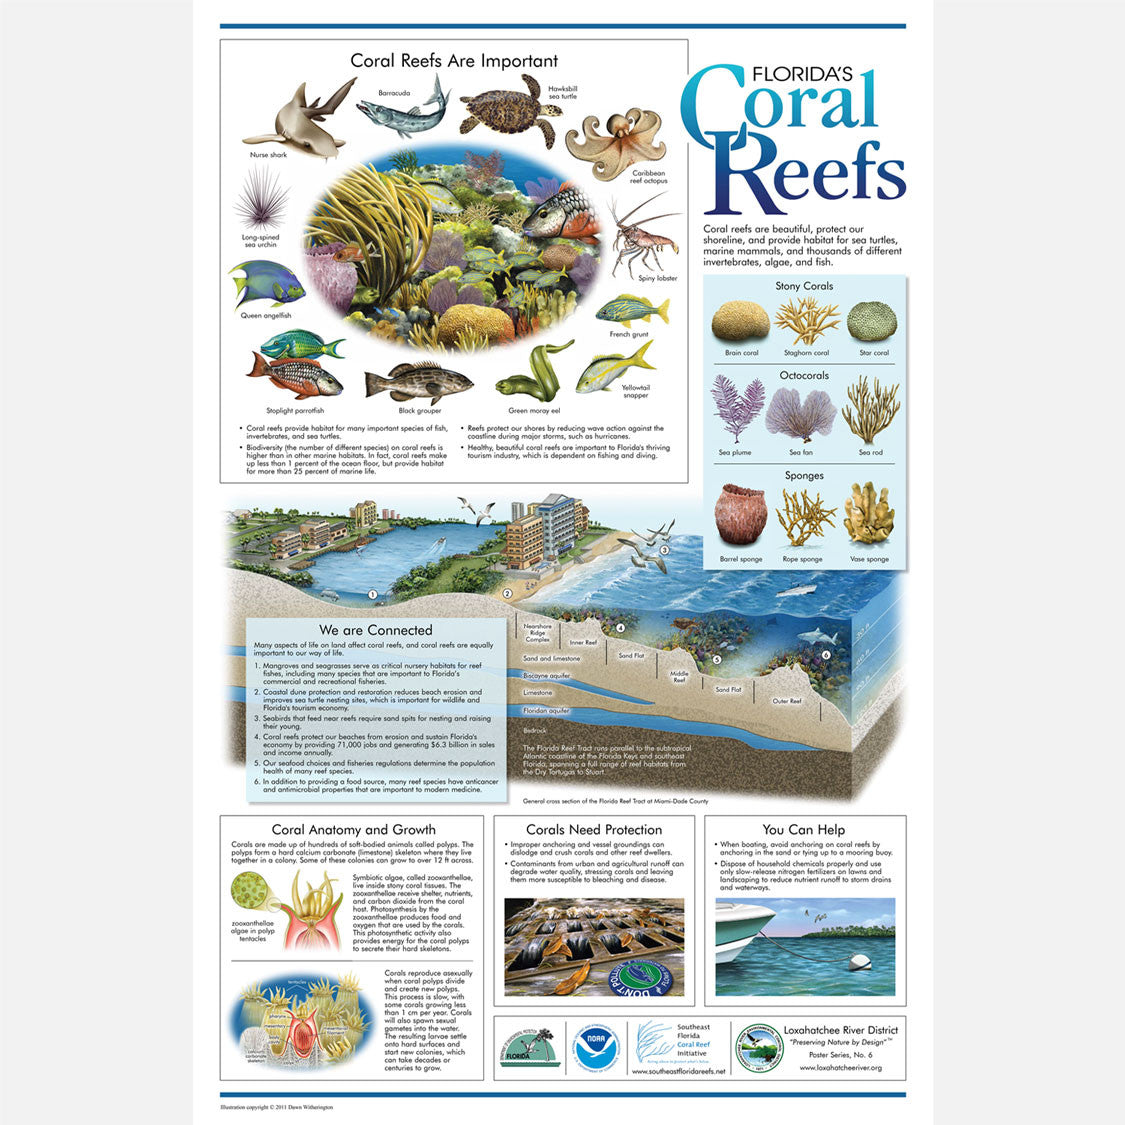 This beautiful poster provides information about the importance of Florida's coral reefs. 